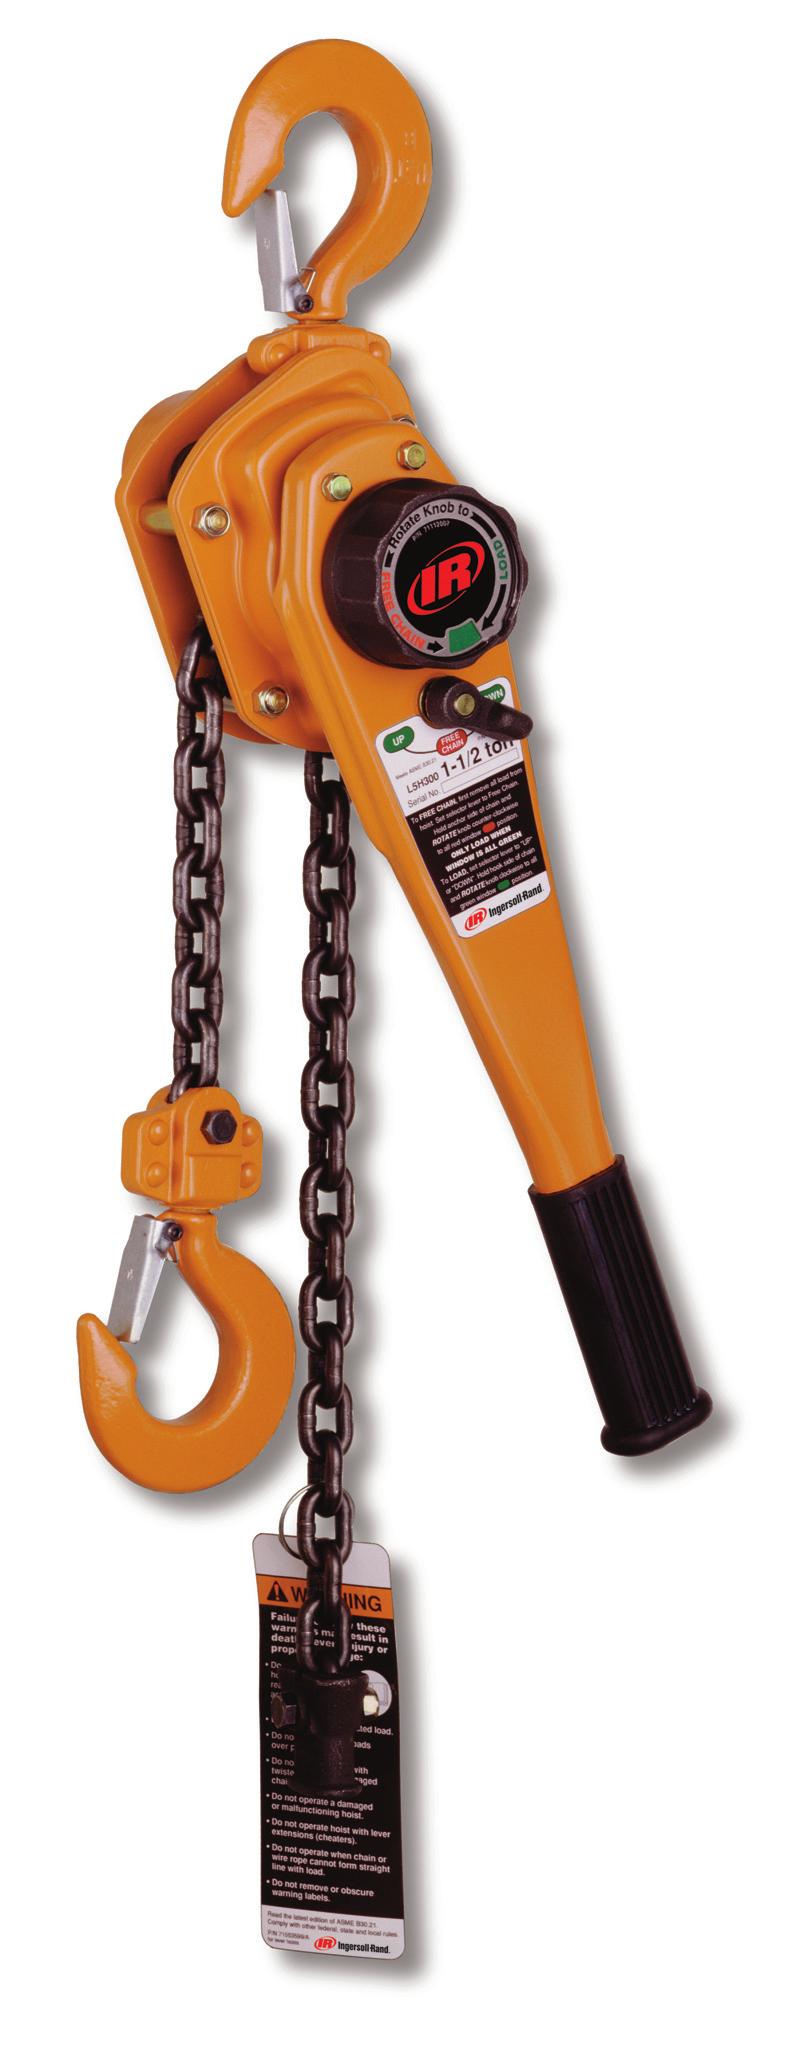 R HIN L5H Premium Series Lever hain Hoist 3/4 6 metric ton Line Pull apacity eatures Our top of the line lever chain hoist. The ultimate in performance, endurance.